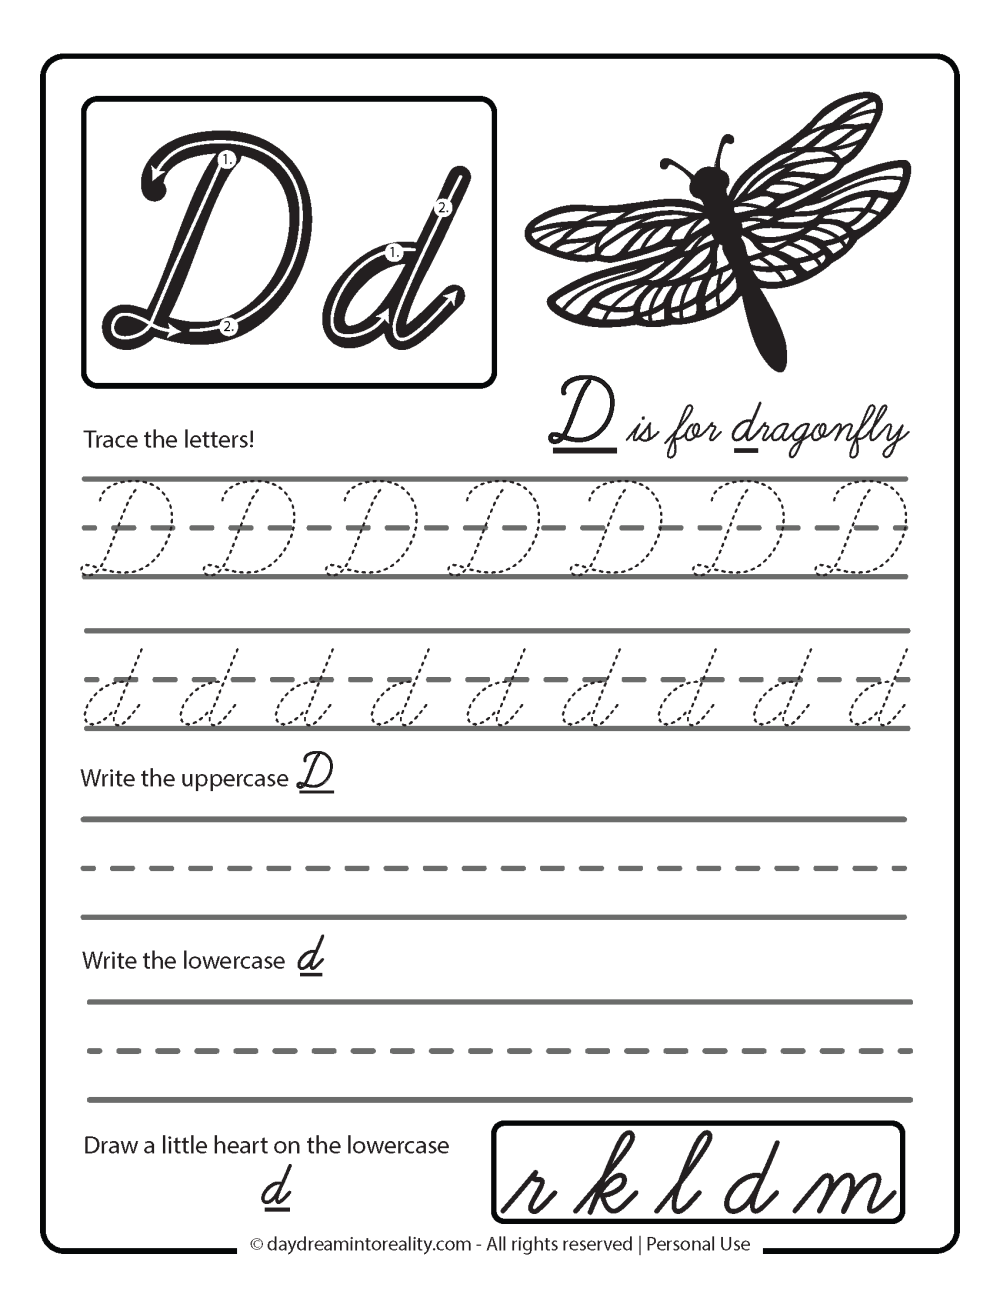 Letter D worksheet free printables - cursive writing practice - d is for dragonfly